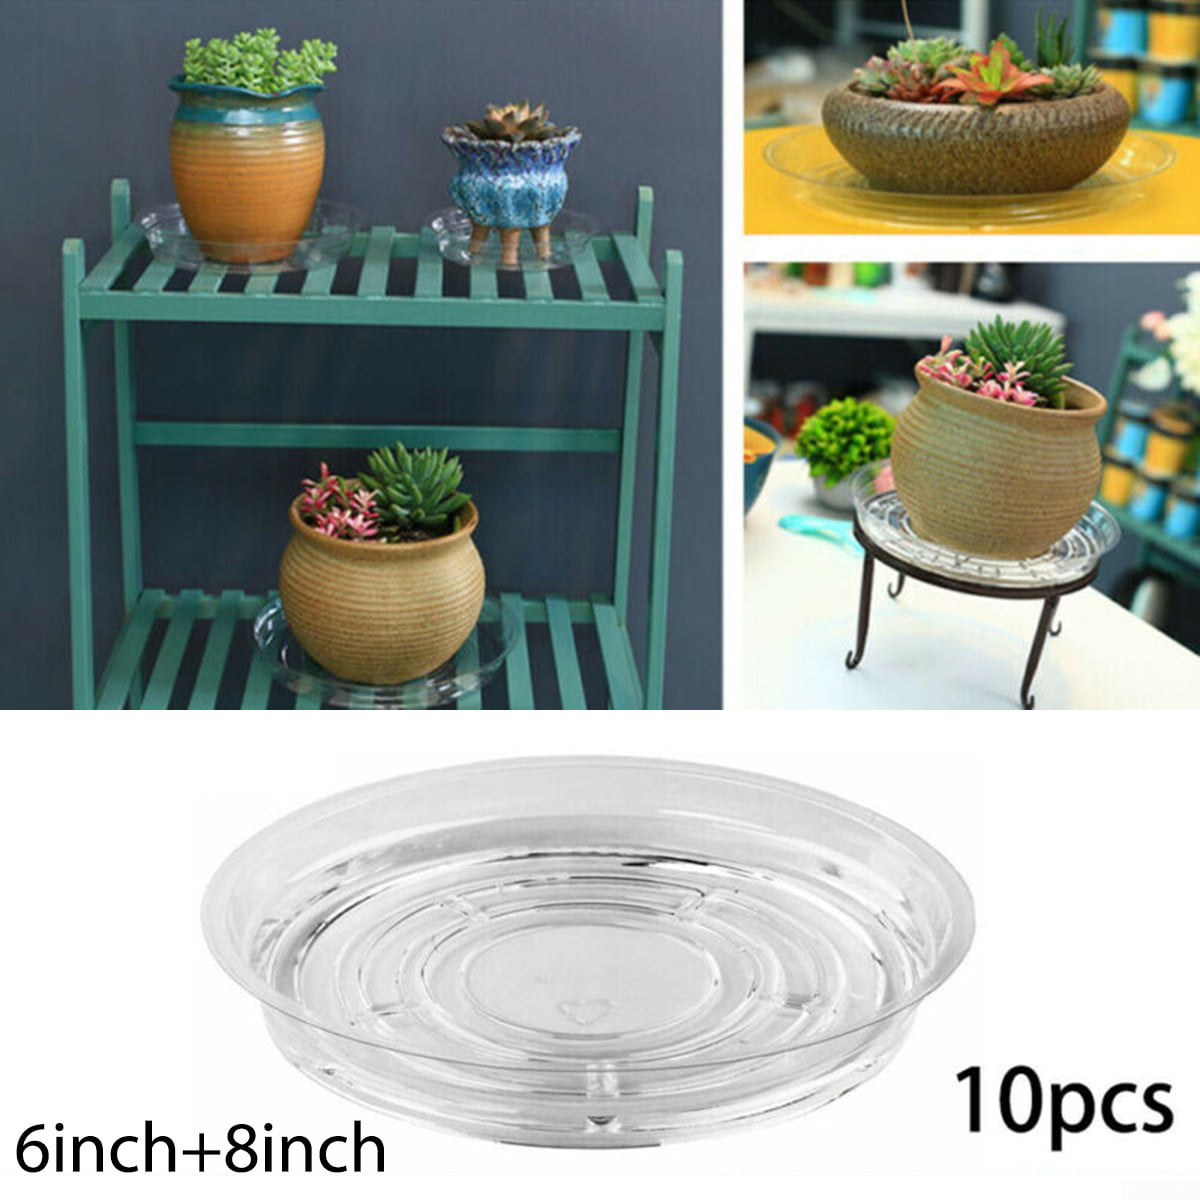 Details about   Round Strong Plastic Plant Pot Saucer Dish Water Drip Tray Drain Flower Bas e 